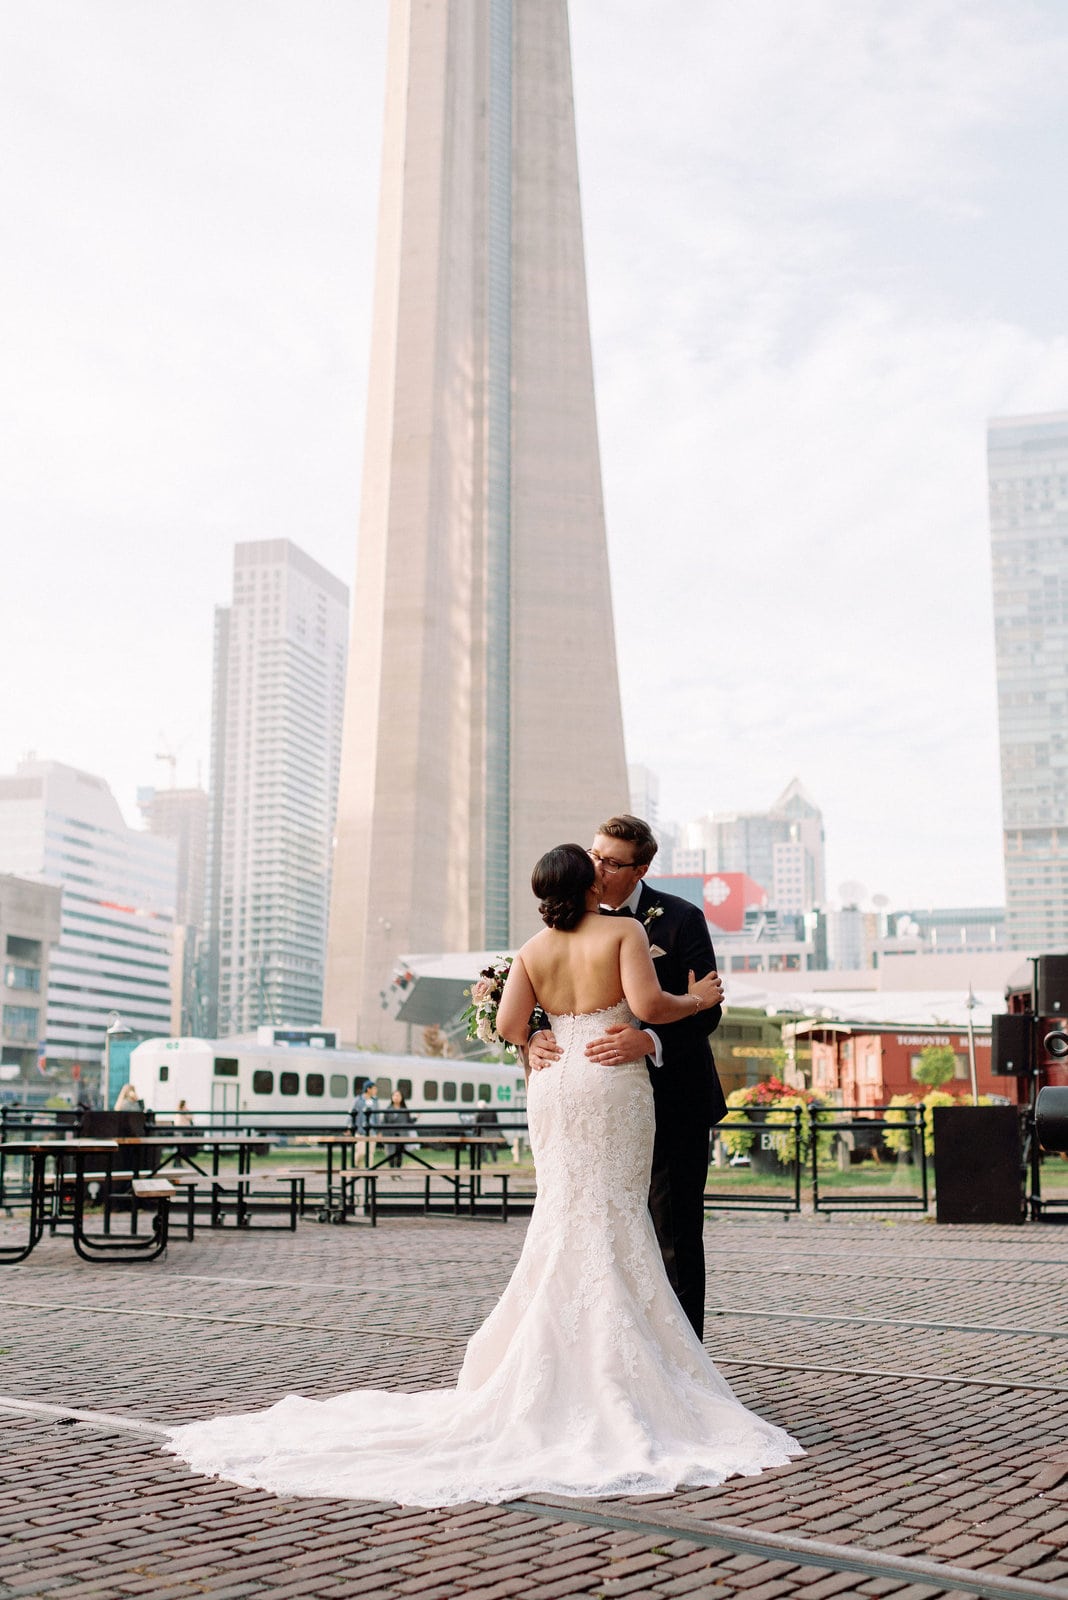 modern romantic editorial portraits CN tower skydome rogers centre featured by martha stewart weddings steam whistle wedding toronto wedding venue jacqueline james photography